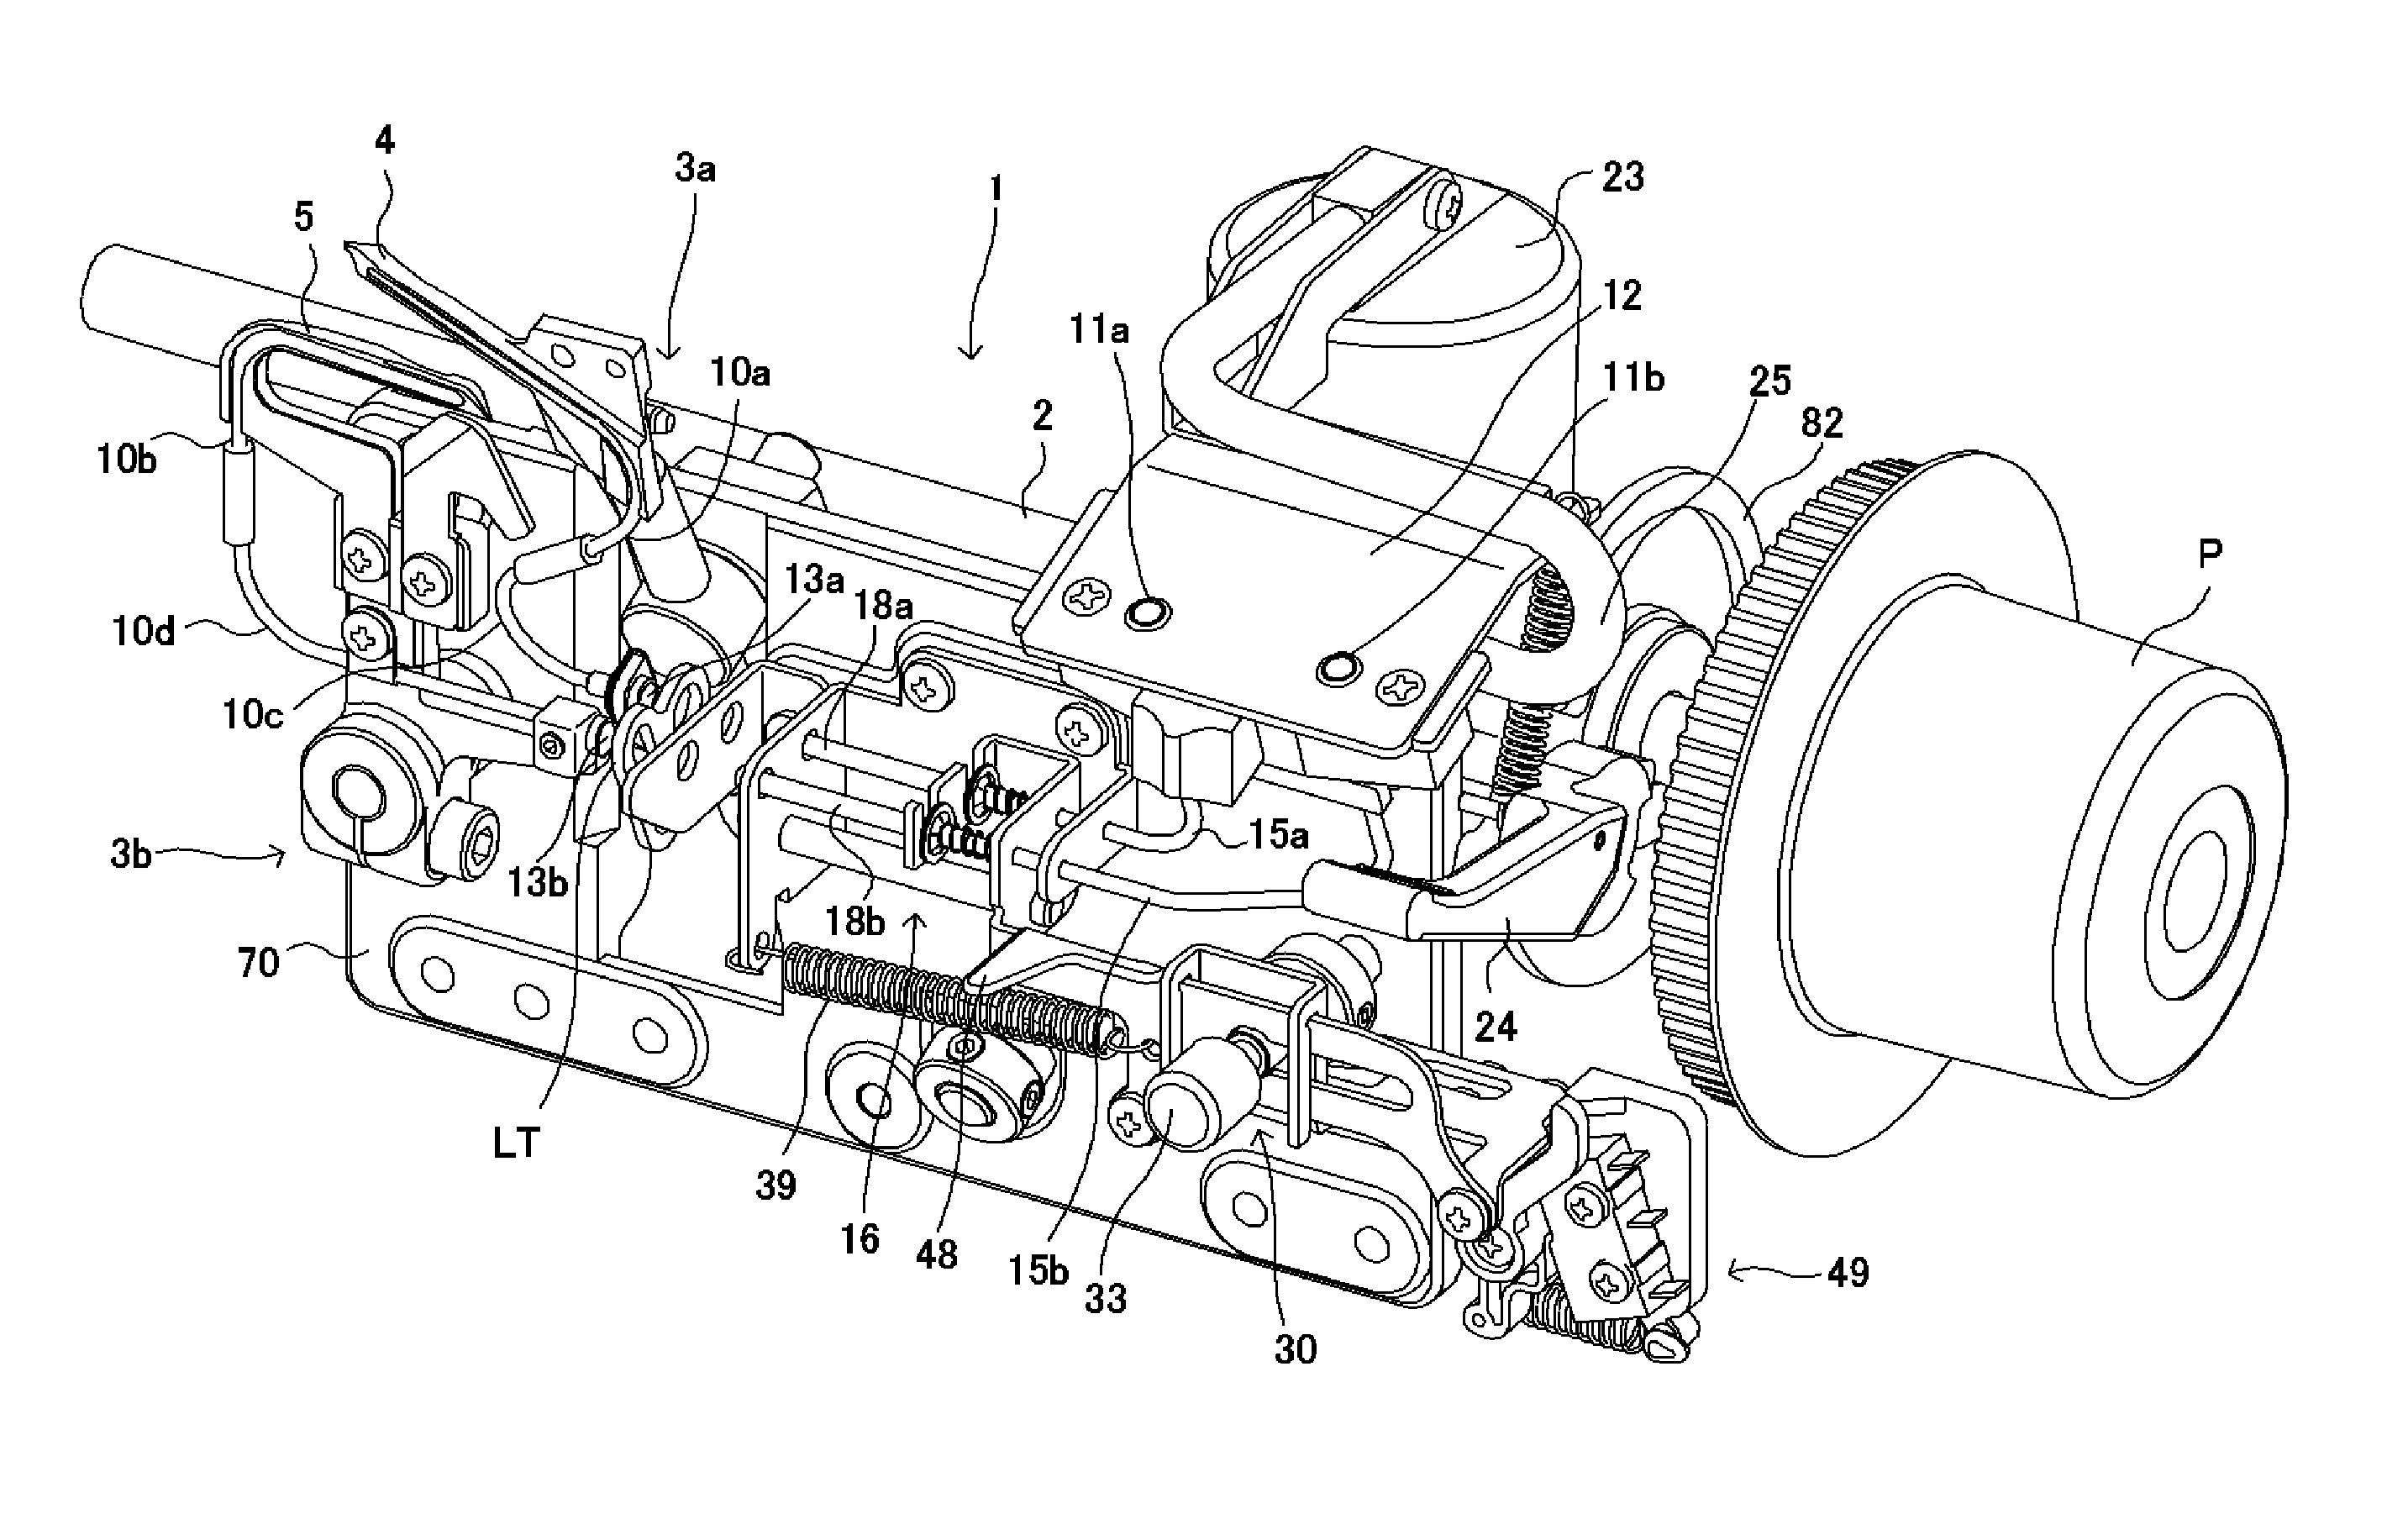 Gas carrying threading device of sewing machine